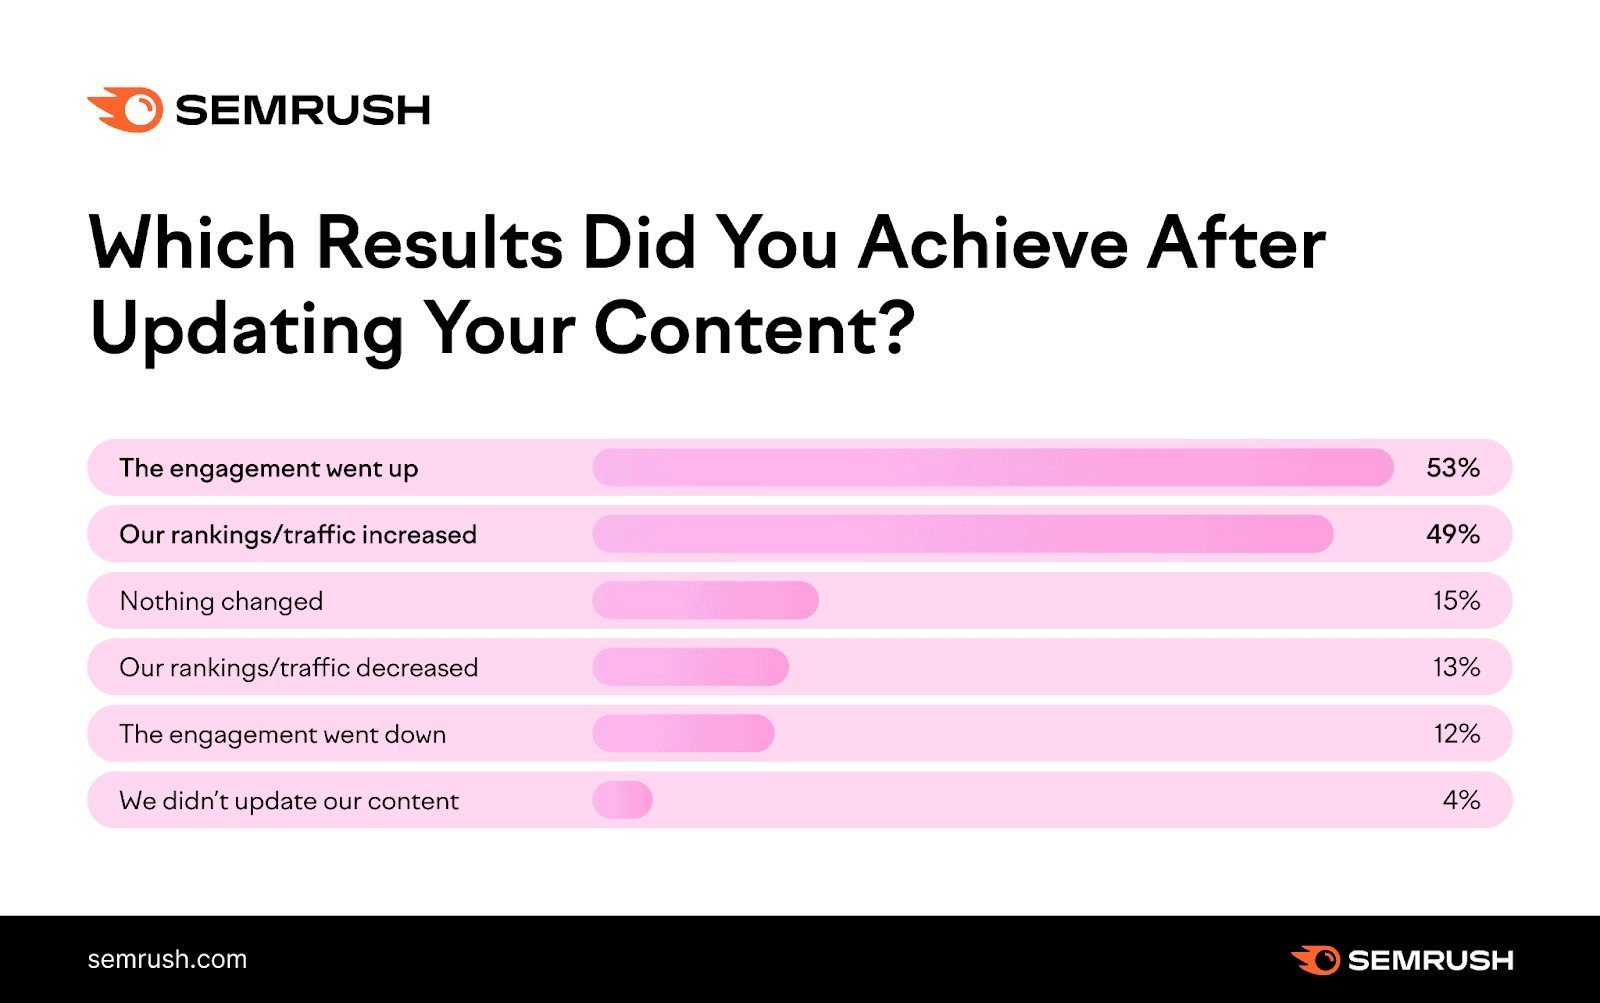 Semrush'S Survey Responses To &Quot;Which Results Did You Achieve After Updating Your Content?&Quot; Question